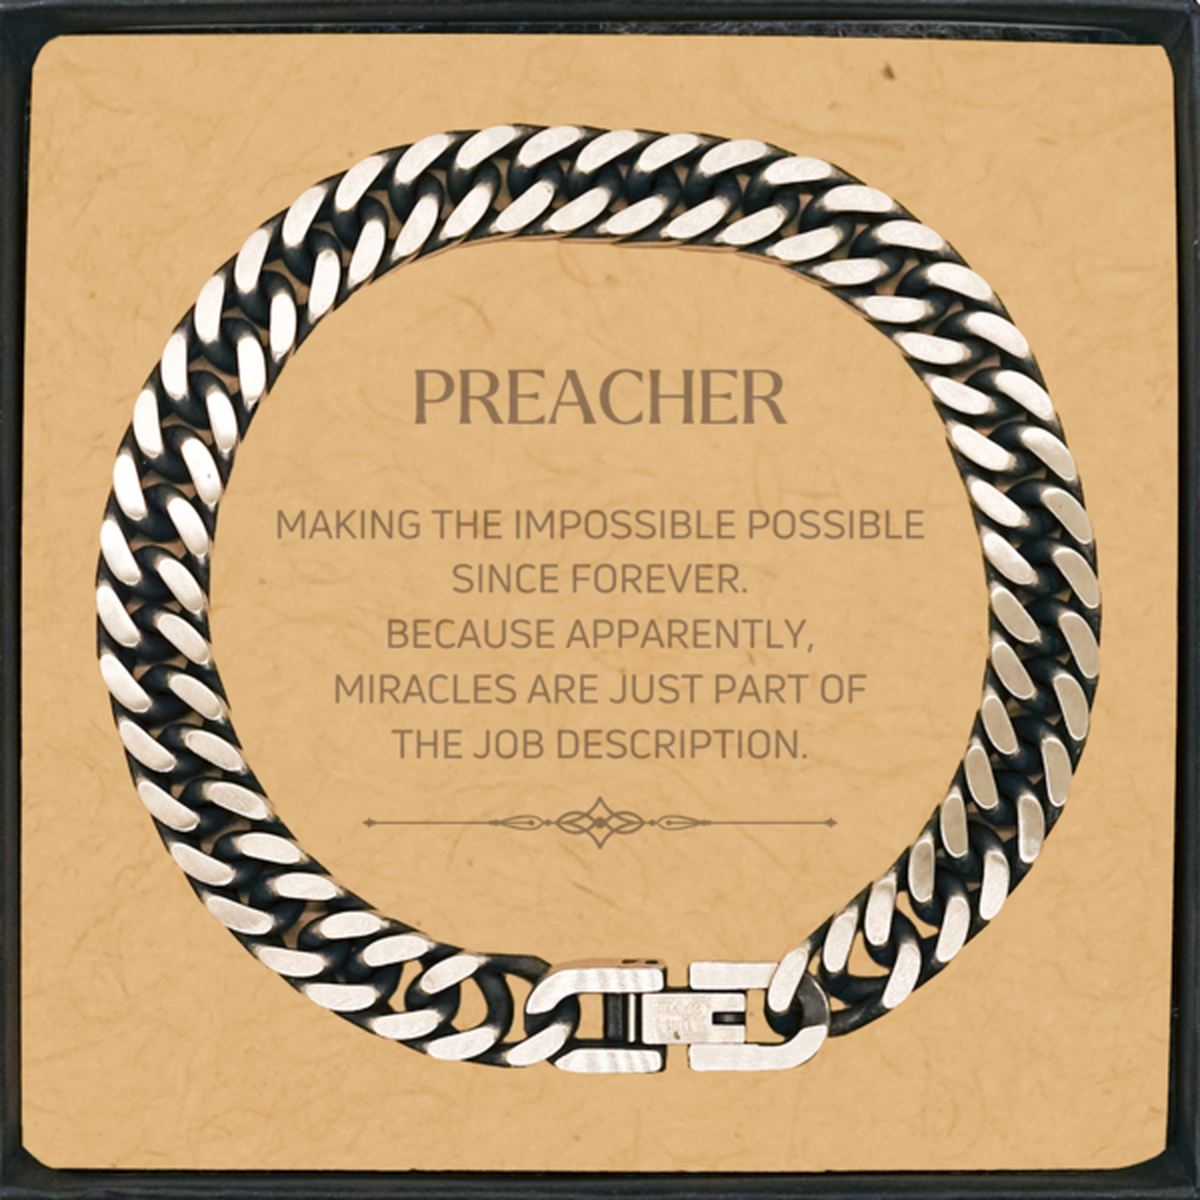 Funny Preacher Gifts, Miracles are just part of the job description, Inspirational Birthday Cuban Link Chain Bracelet For Preacher, Men, Women, Coworkers, Friends, Boss